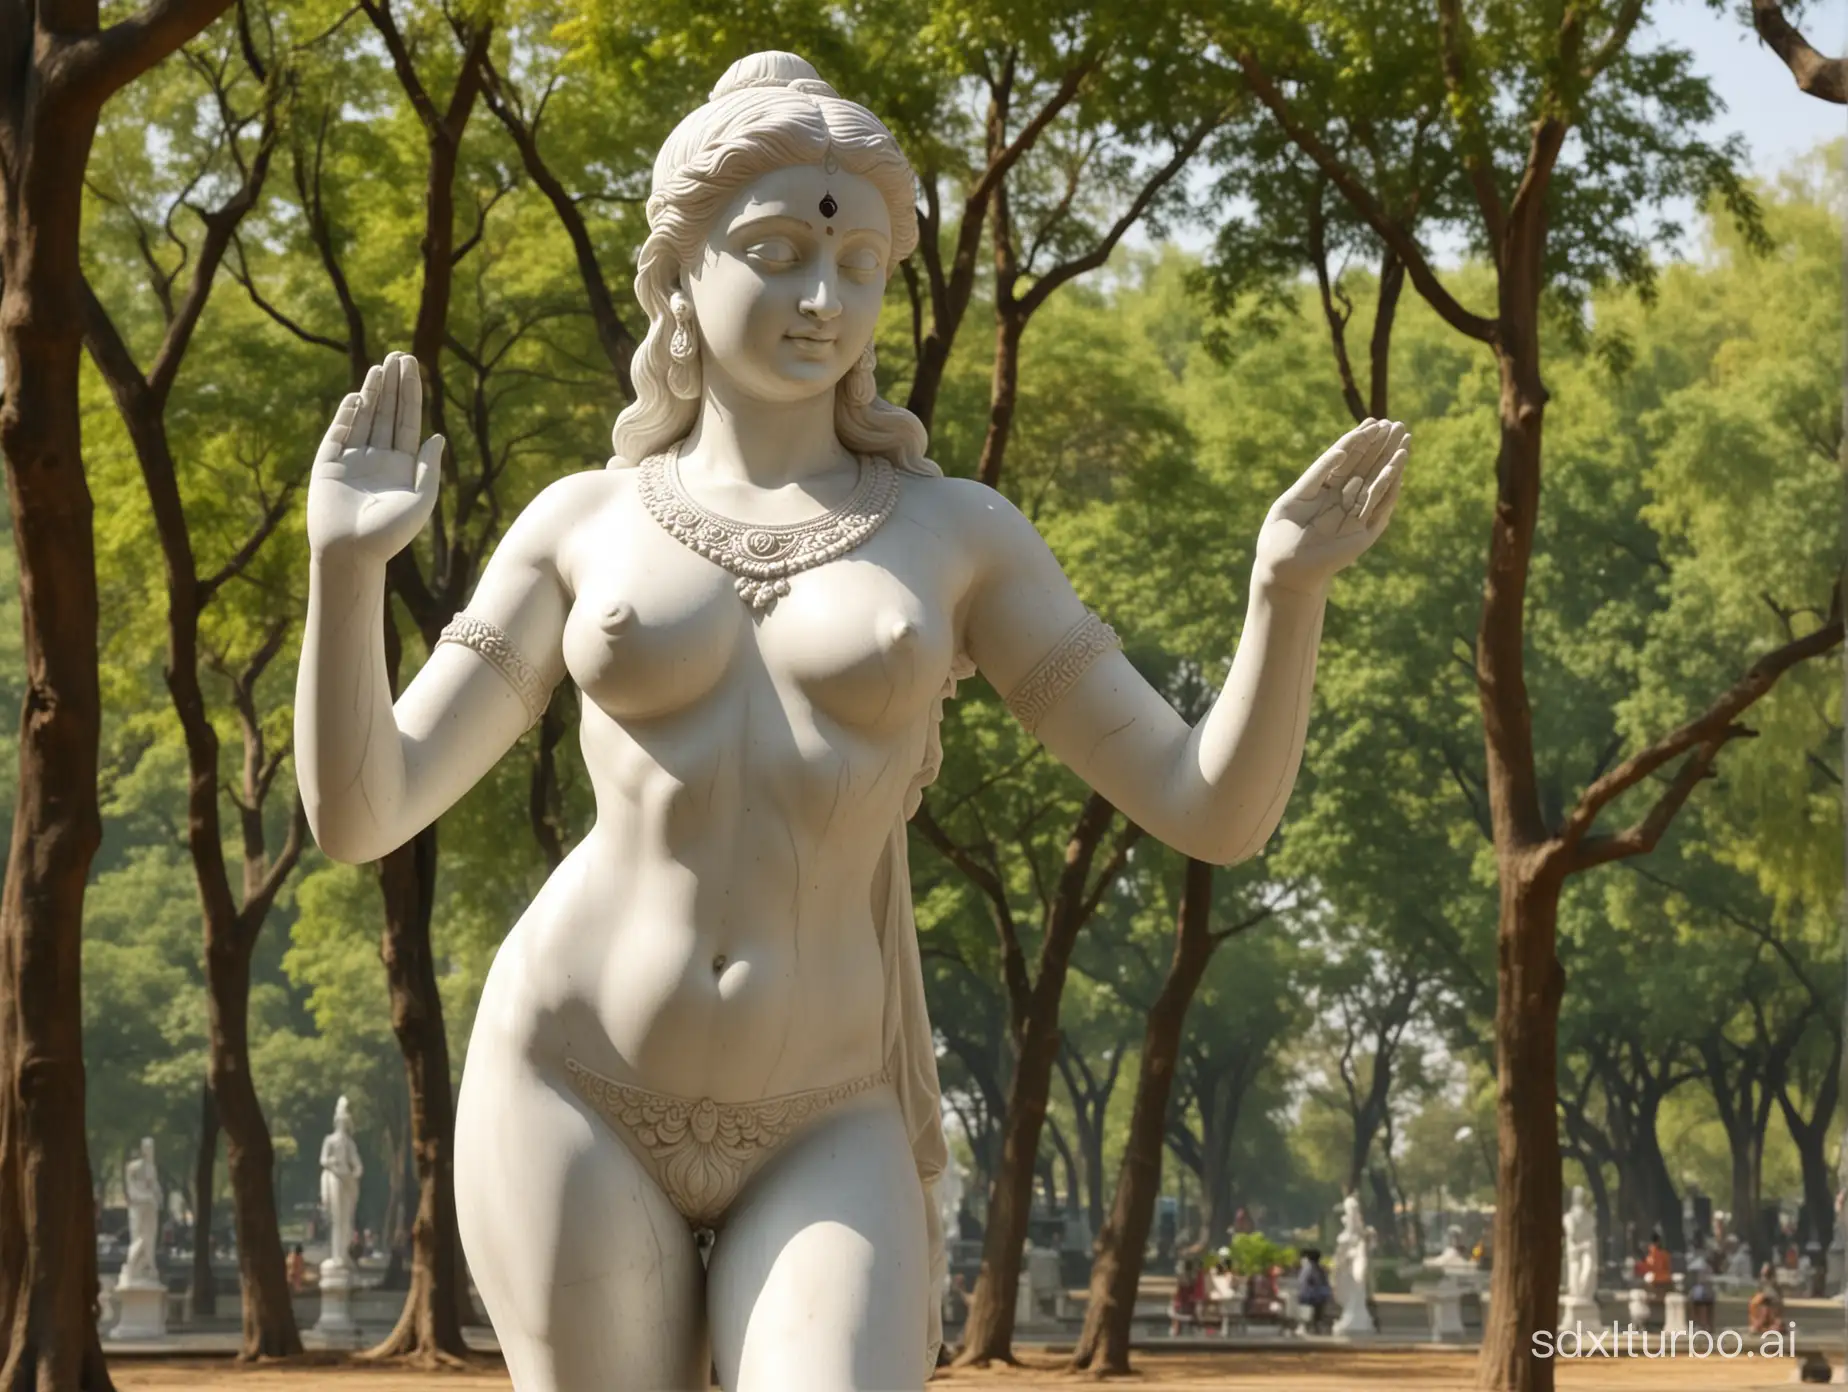 Classical-Hindu-Marble-Statue-of-Nude-Girl-in-Indian-Park